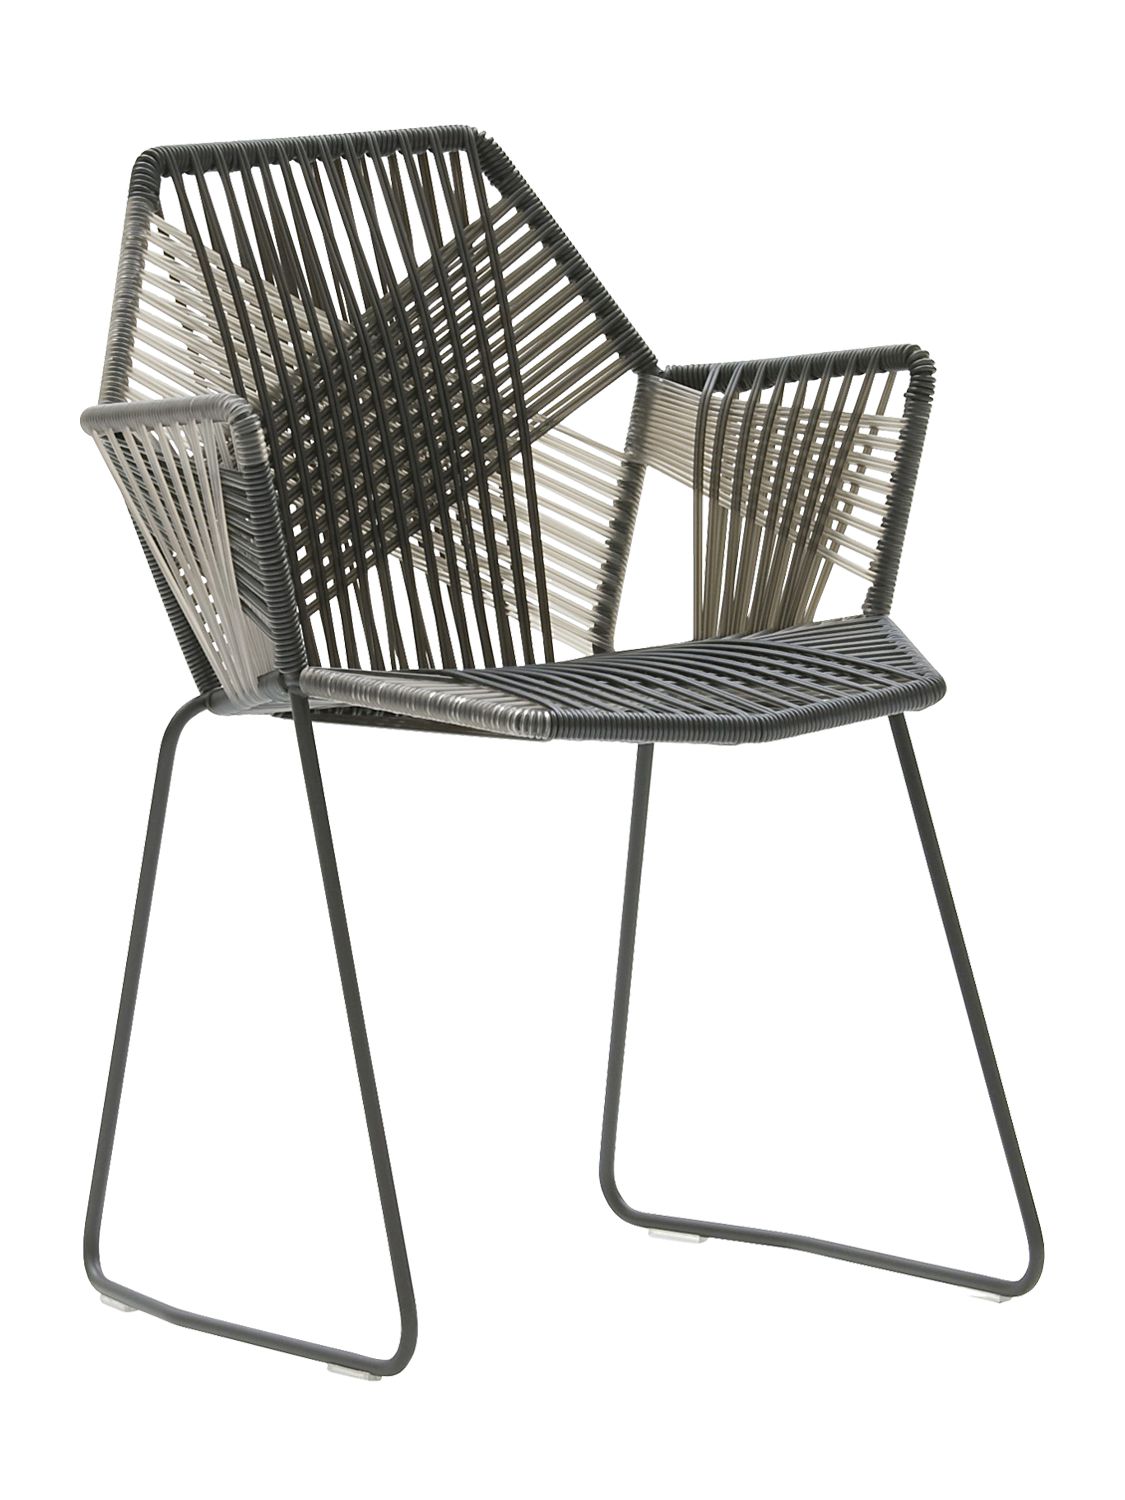  Moroso Tropicalia Chair With Armrests 